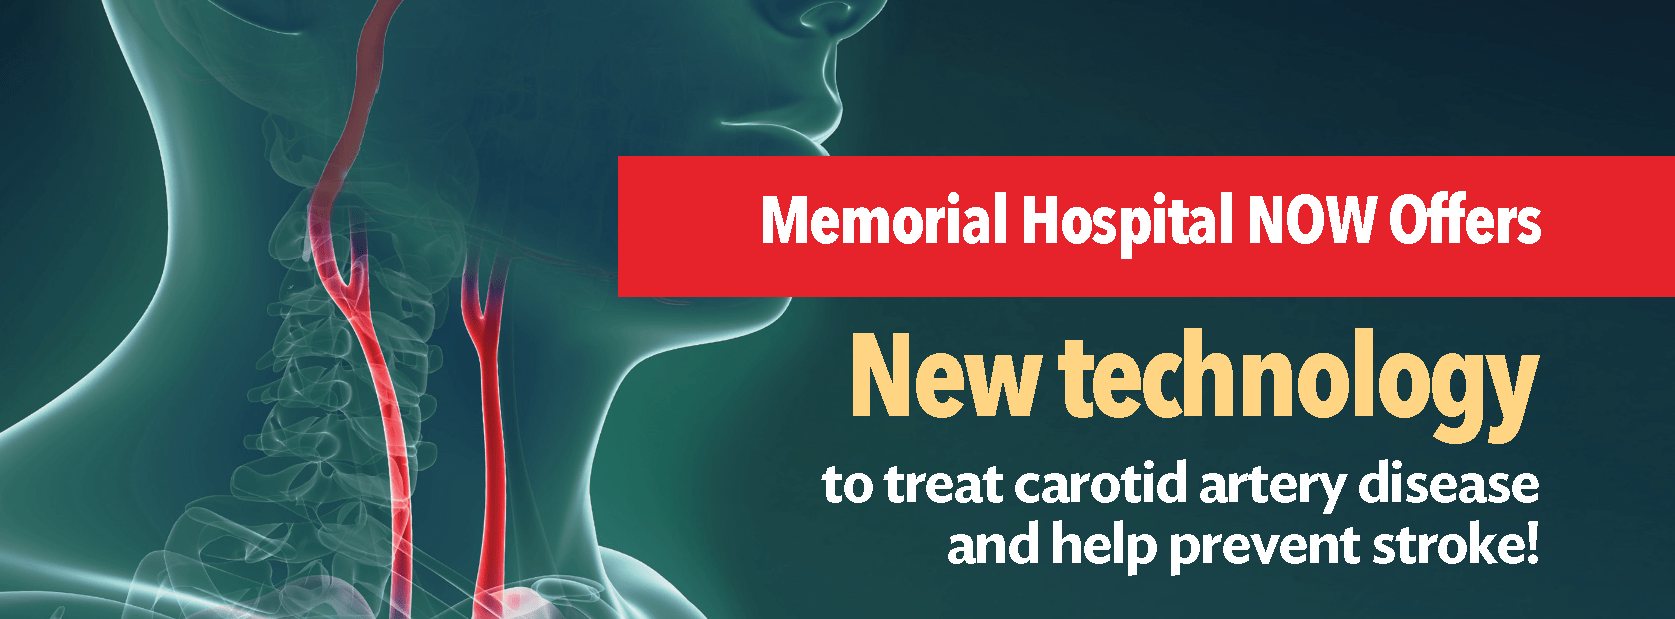 Memorial Hospital now offers new technology to treat carotid artery disease and help prevent stroke!